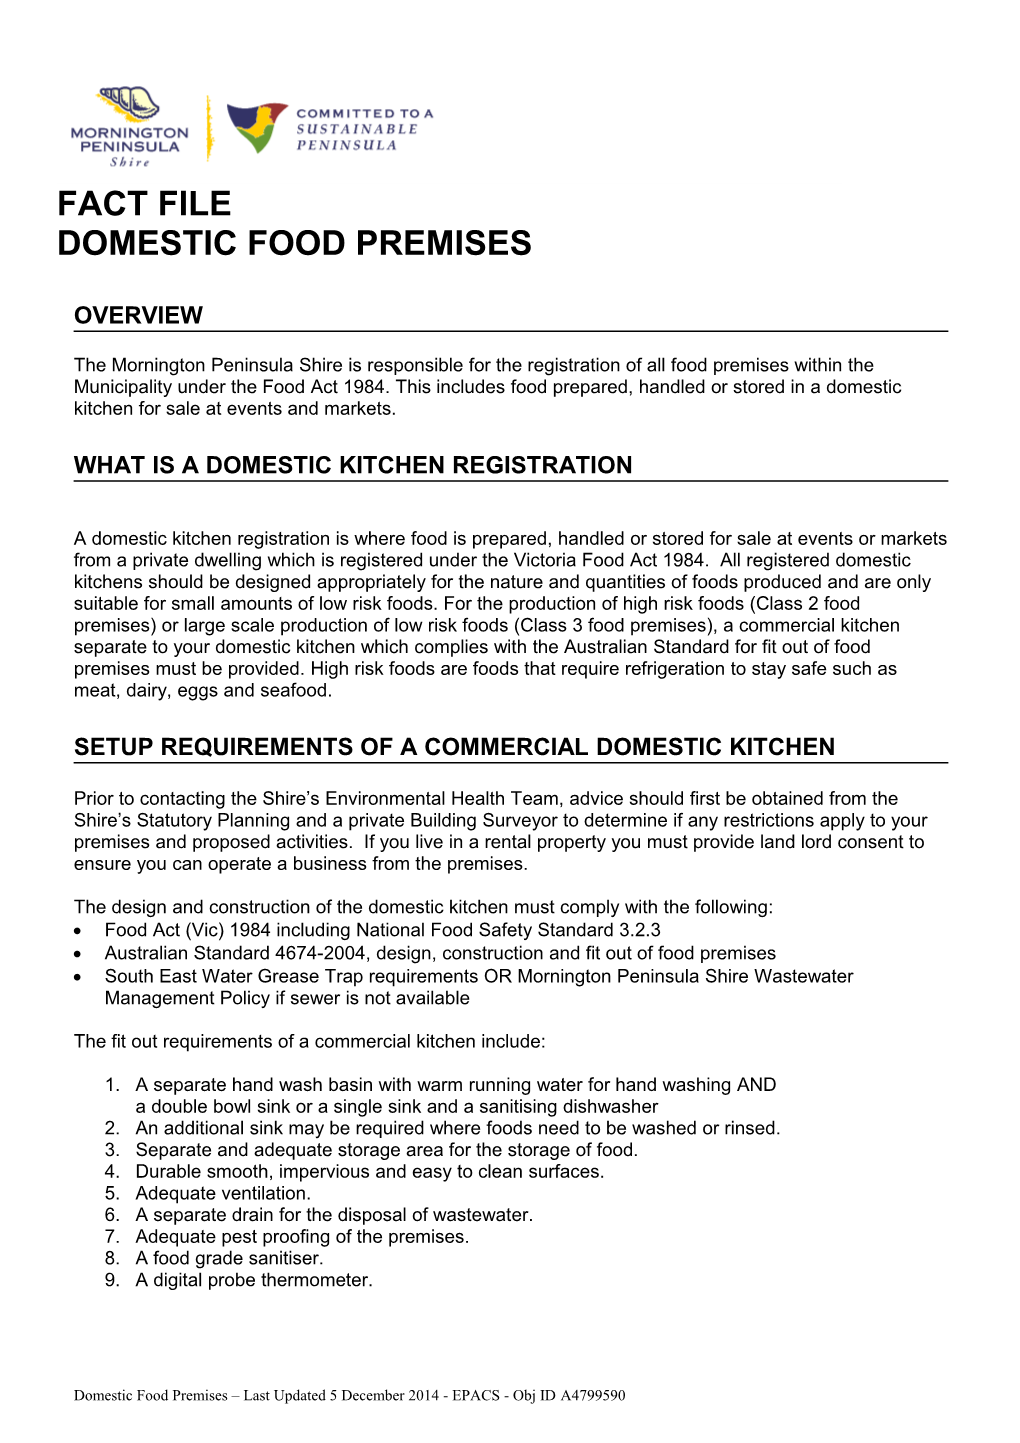 What Is a Domestic Kitchen Registration